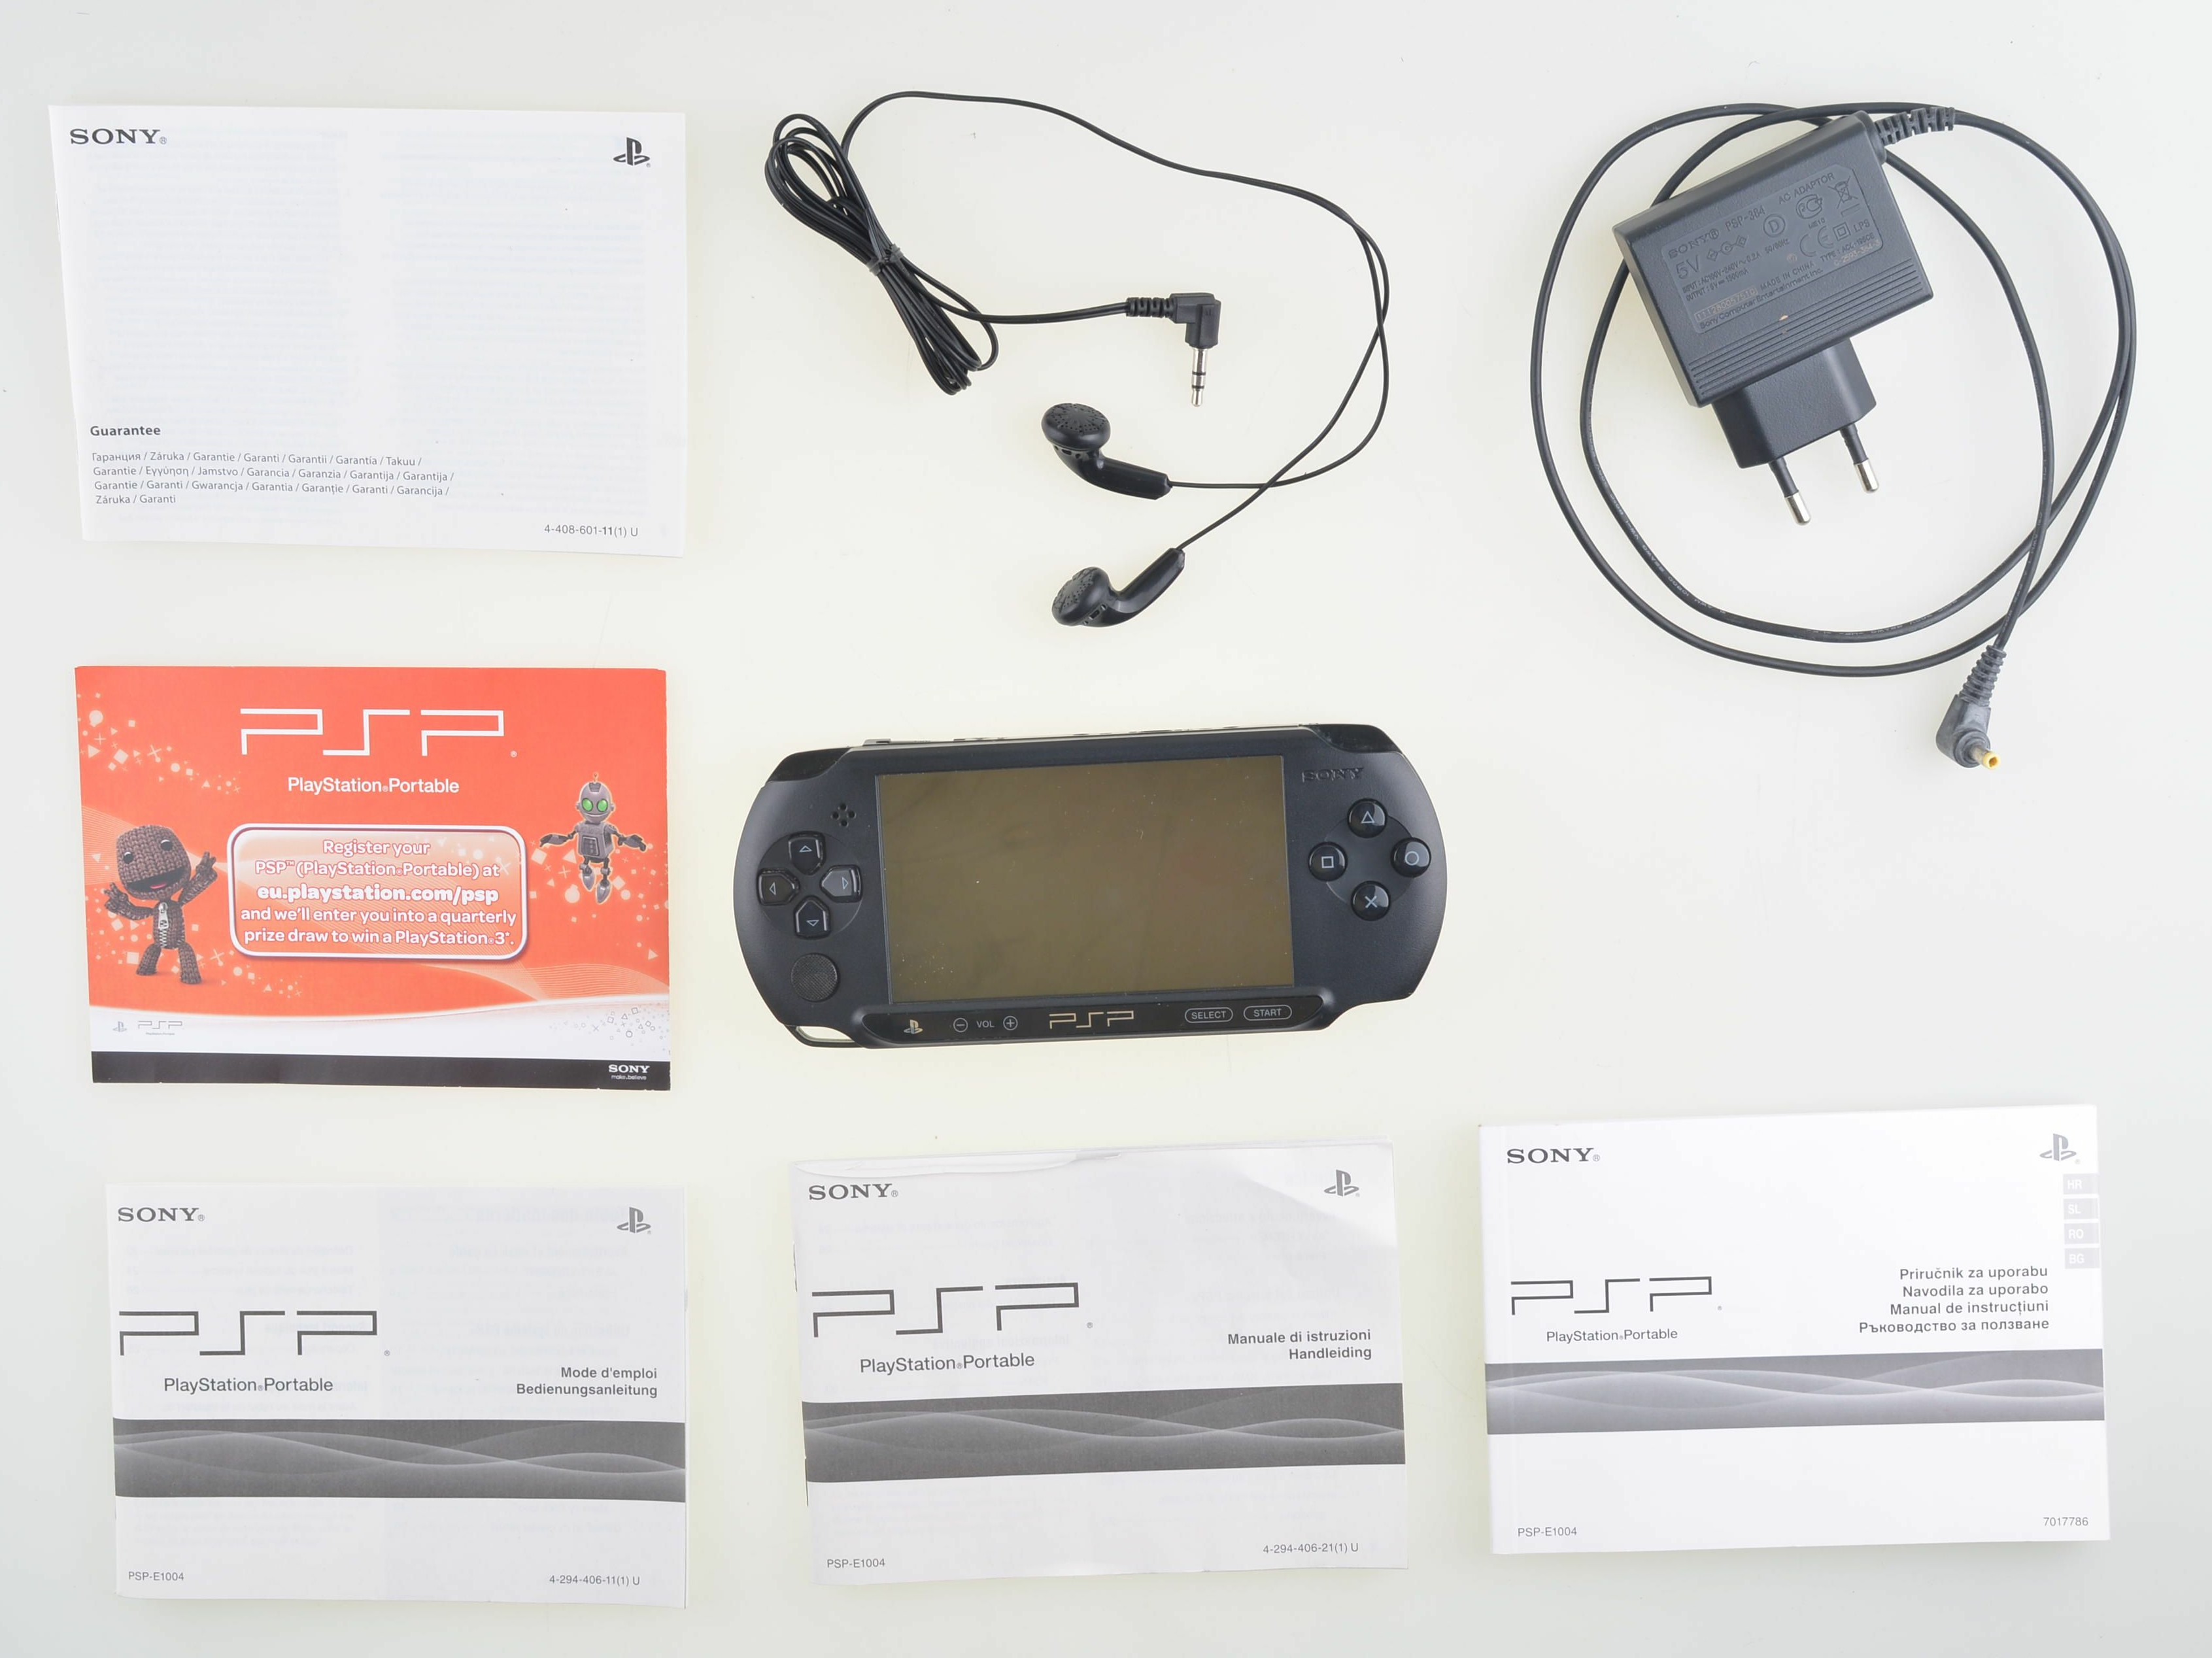 Playstation Portable Street PSP E1004 [Complete] - Playstation Portable Hardware - 2